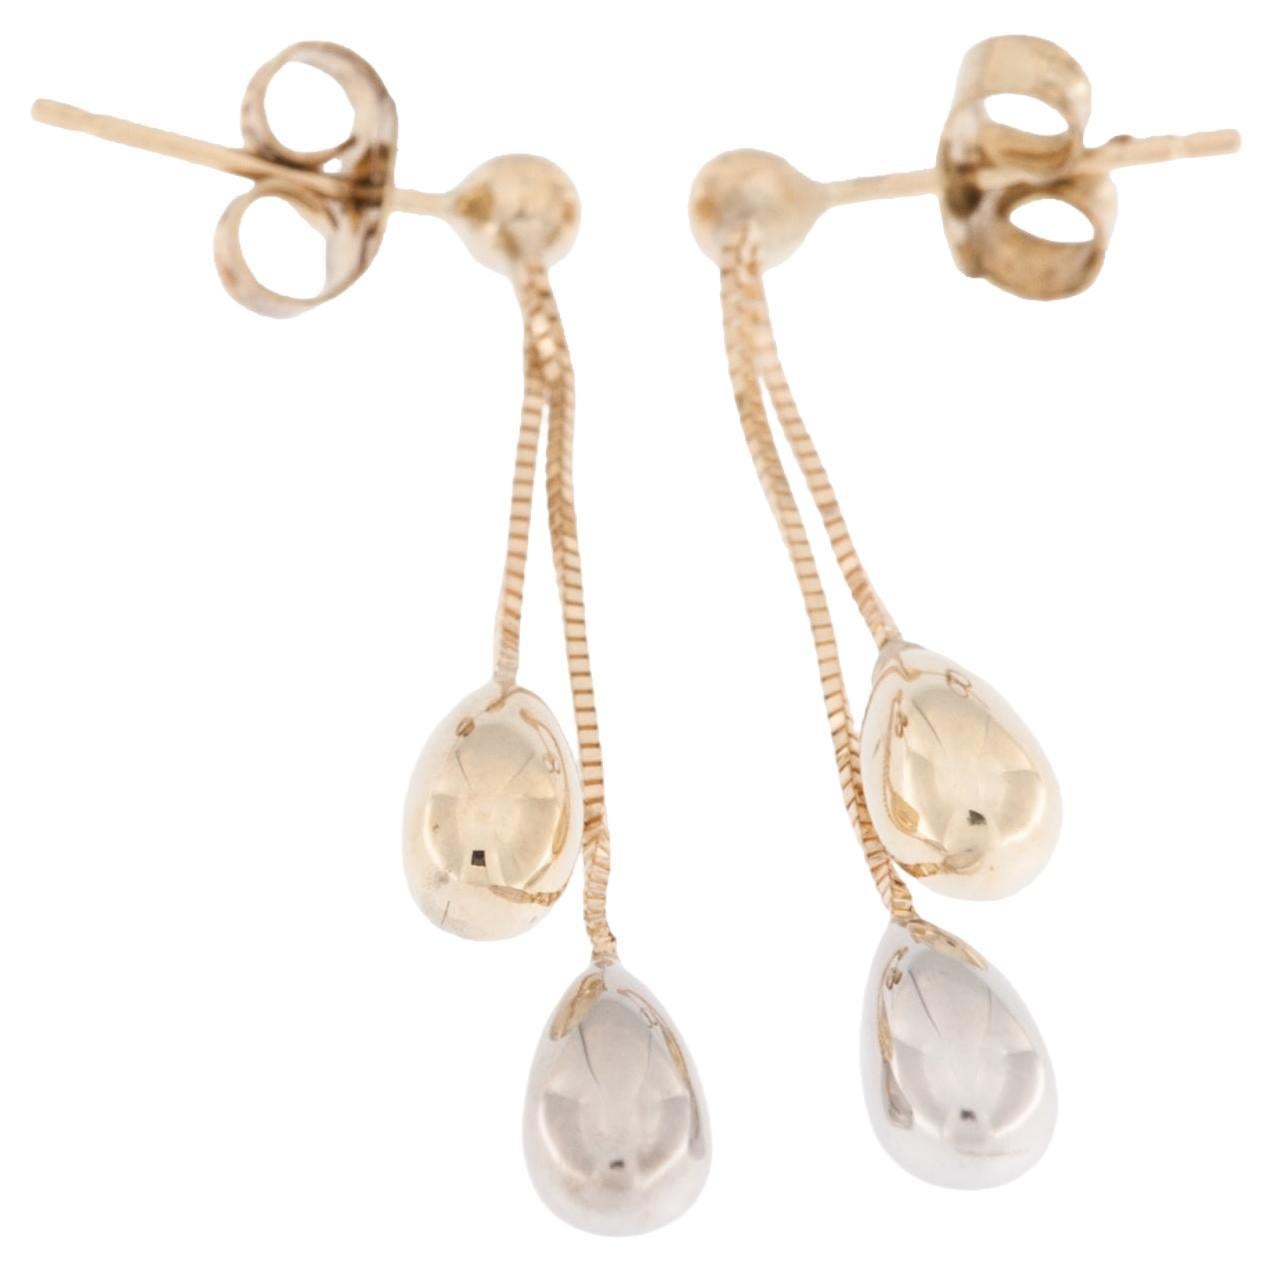 Italian 14kt Yellow and White Gold Drop Earrings